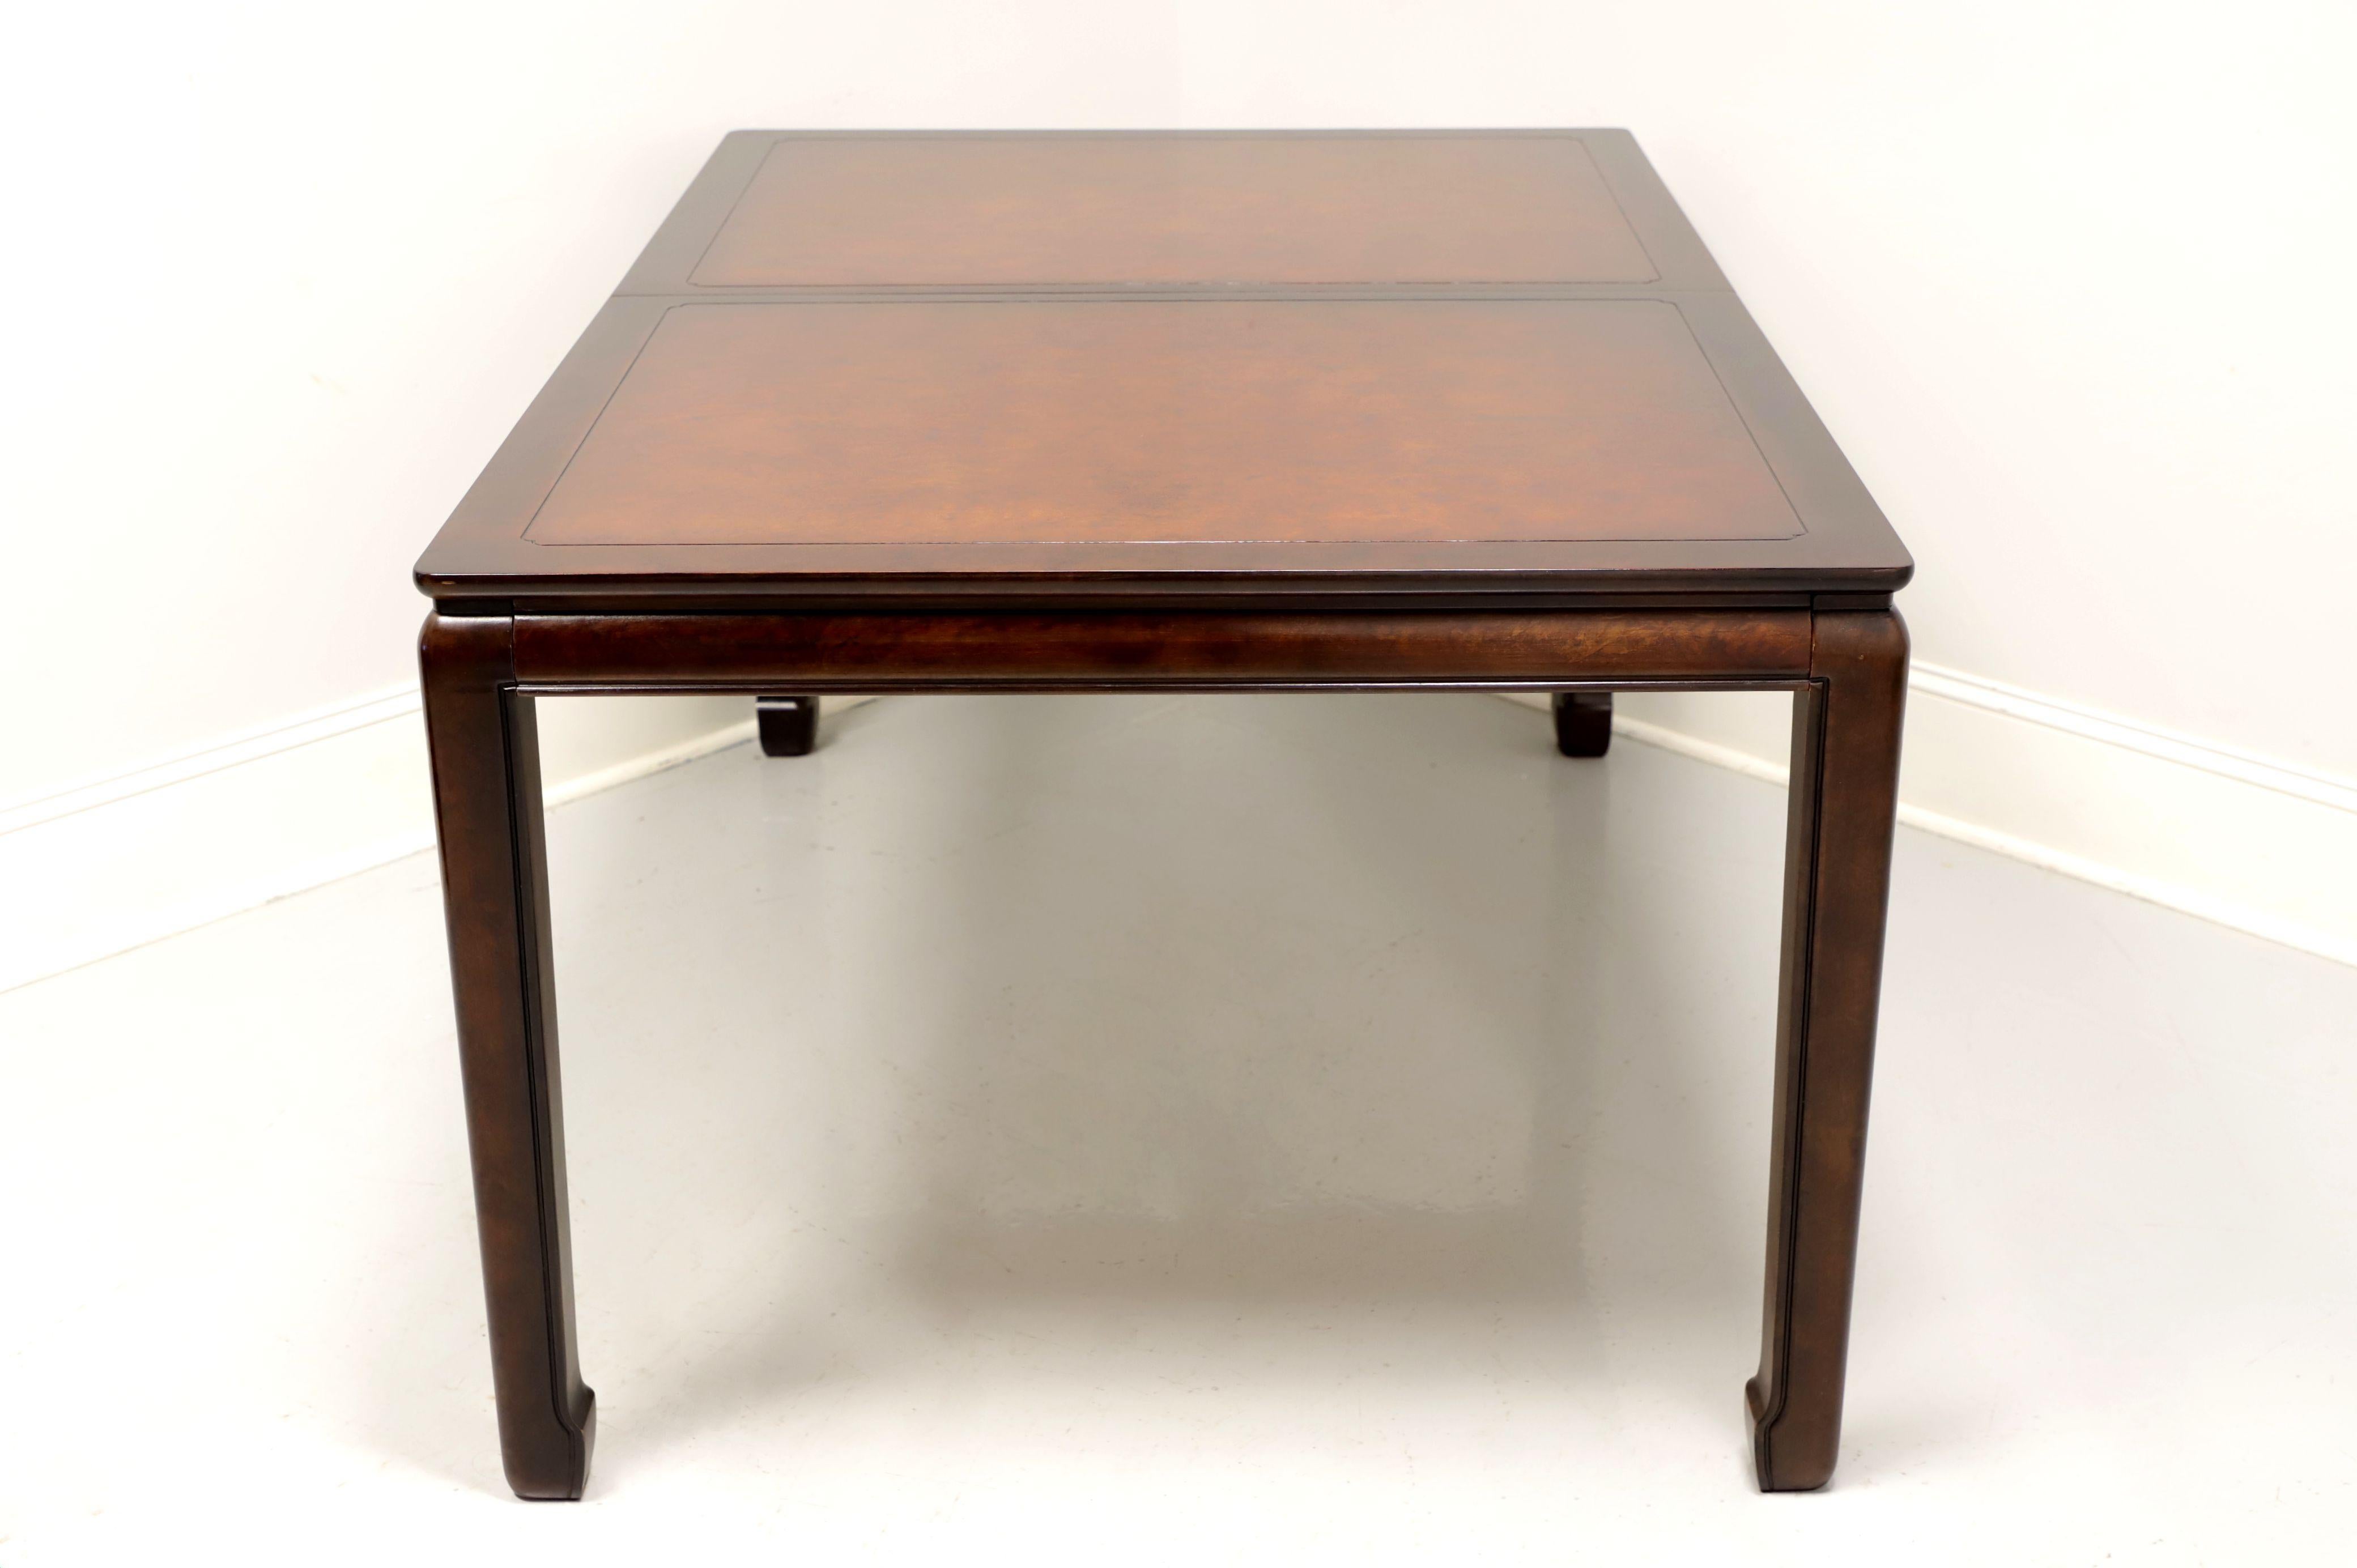 An Asian inspired rectangular dining table by White Furniture, of Mebane, North Carolina, USA. Solid mahogany with banded burl top, slender apron, Asian styled legs and feet. Metal expansion sliders. Includes two extension leaves. Made in the late